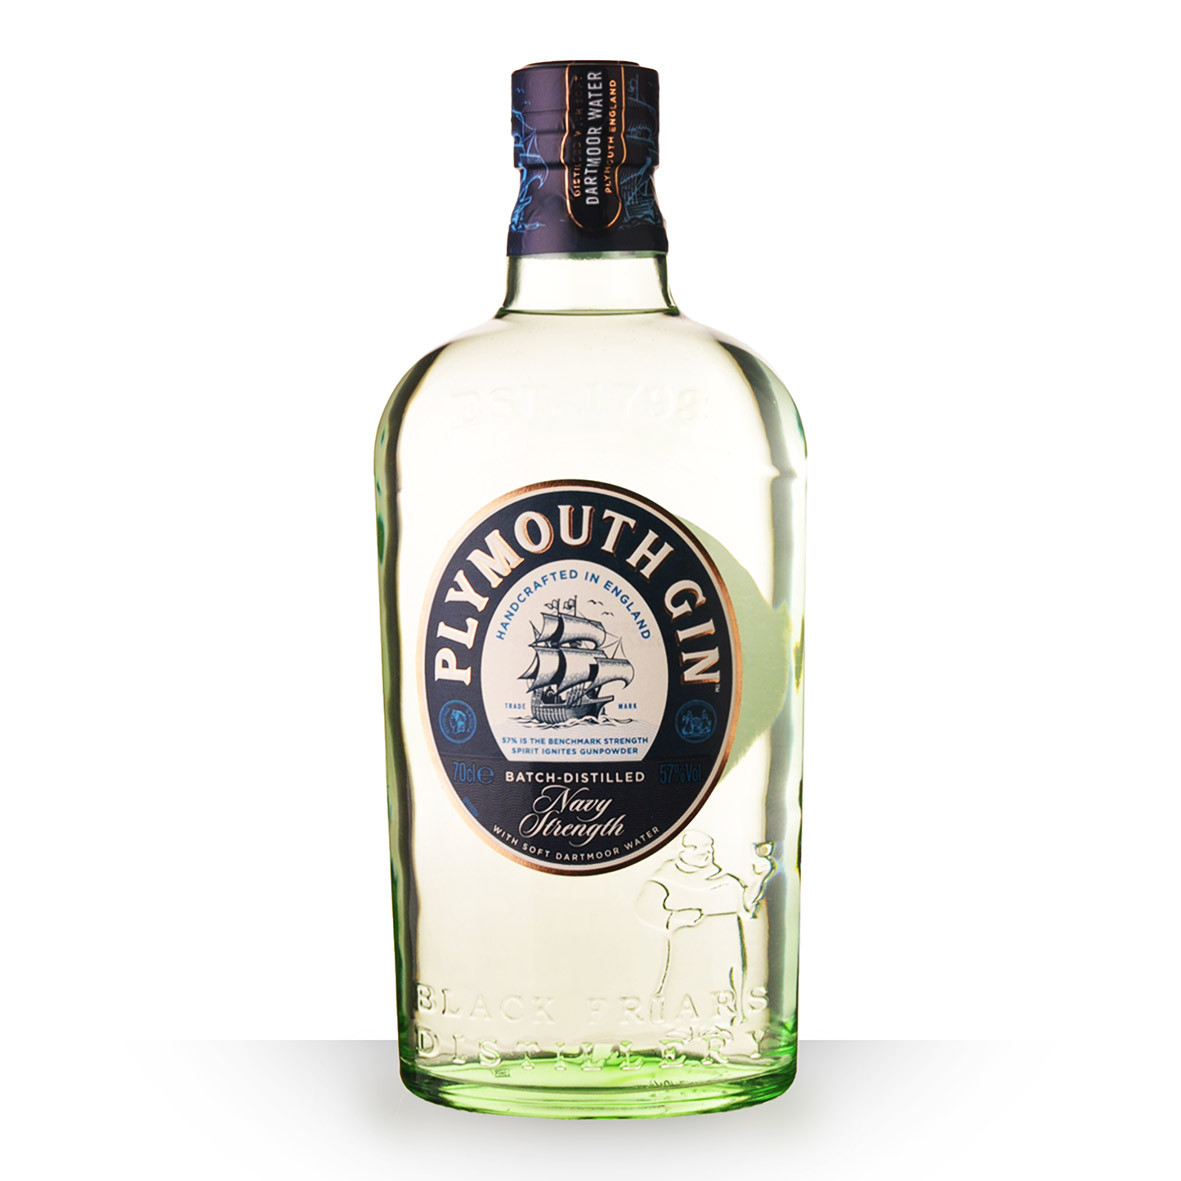 Achat de Gin Plymouth Navy Strength 70cl sur notre site - Odyssee-vins